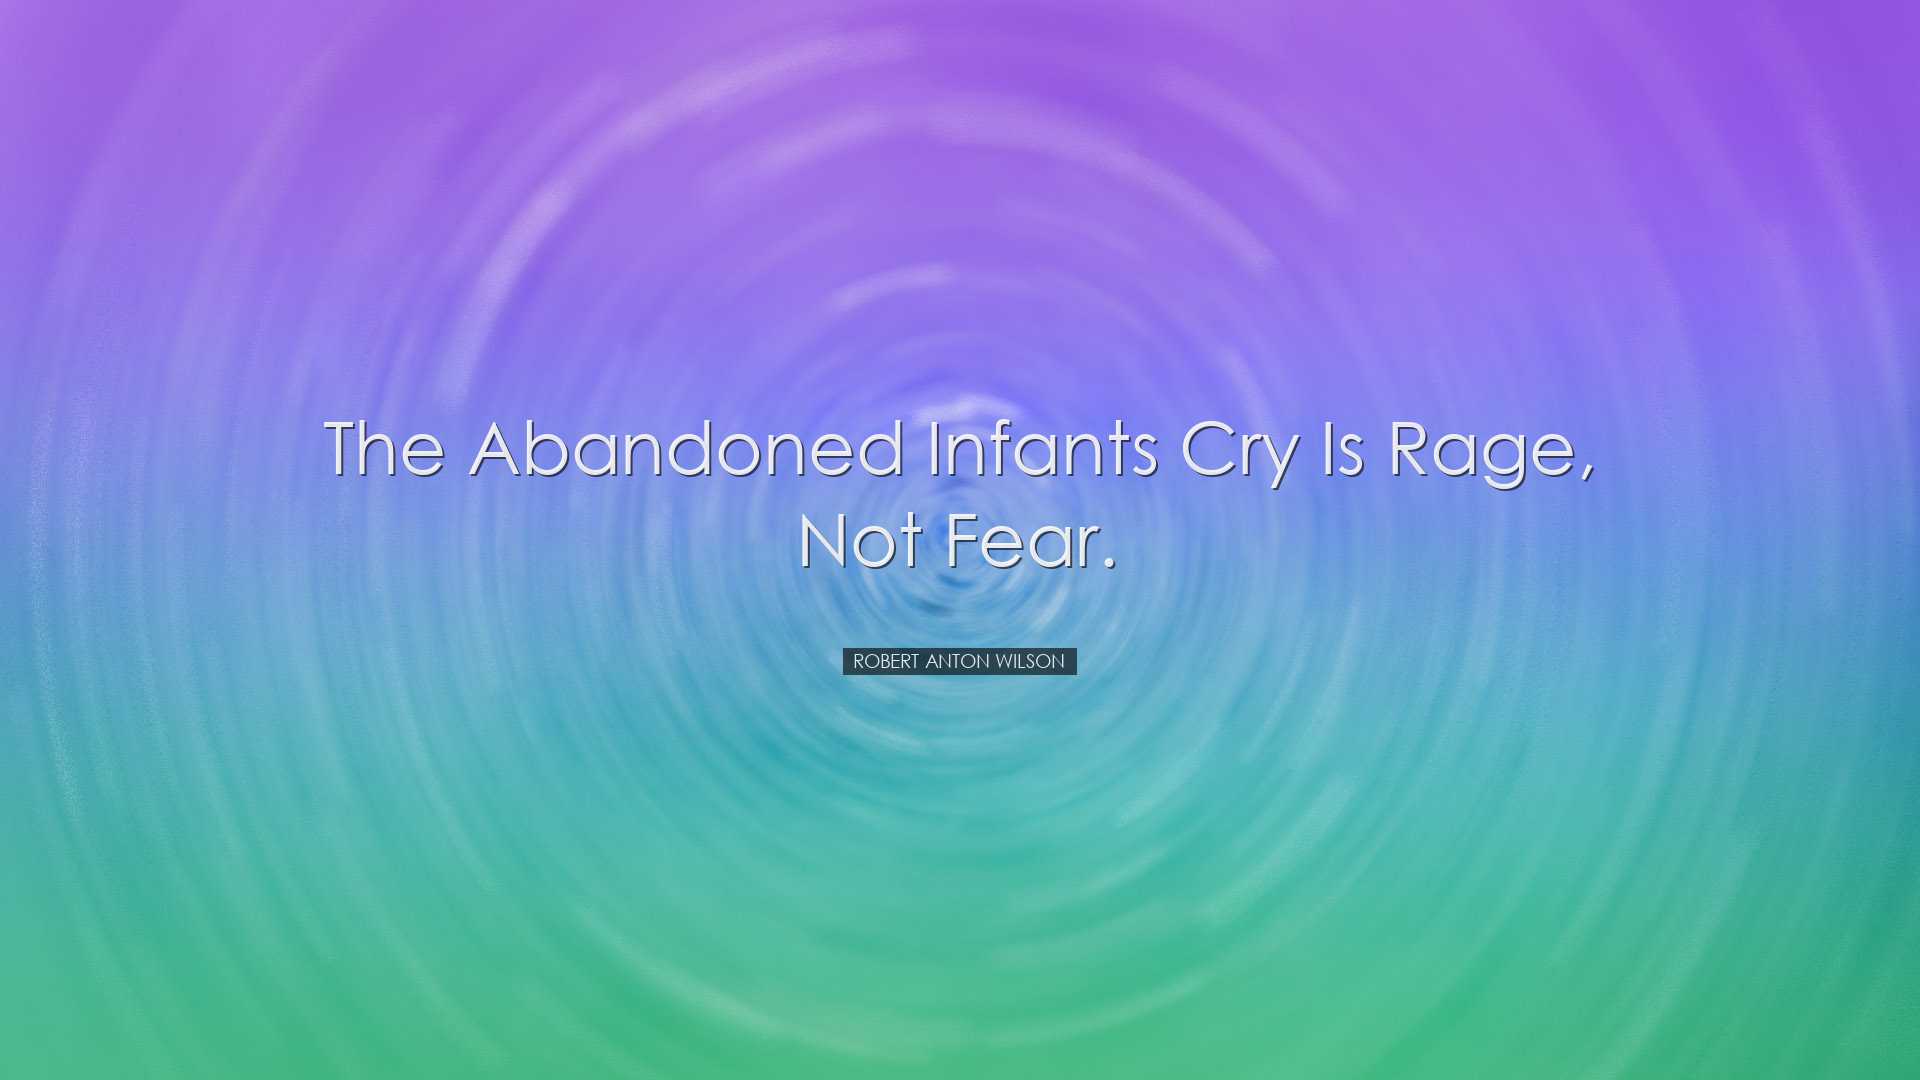 The abandoned infants cry is rage, not fear. - Robert Anton Wilson